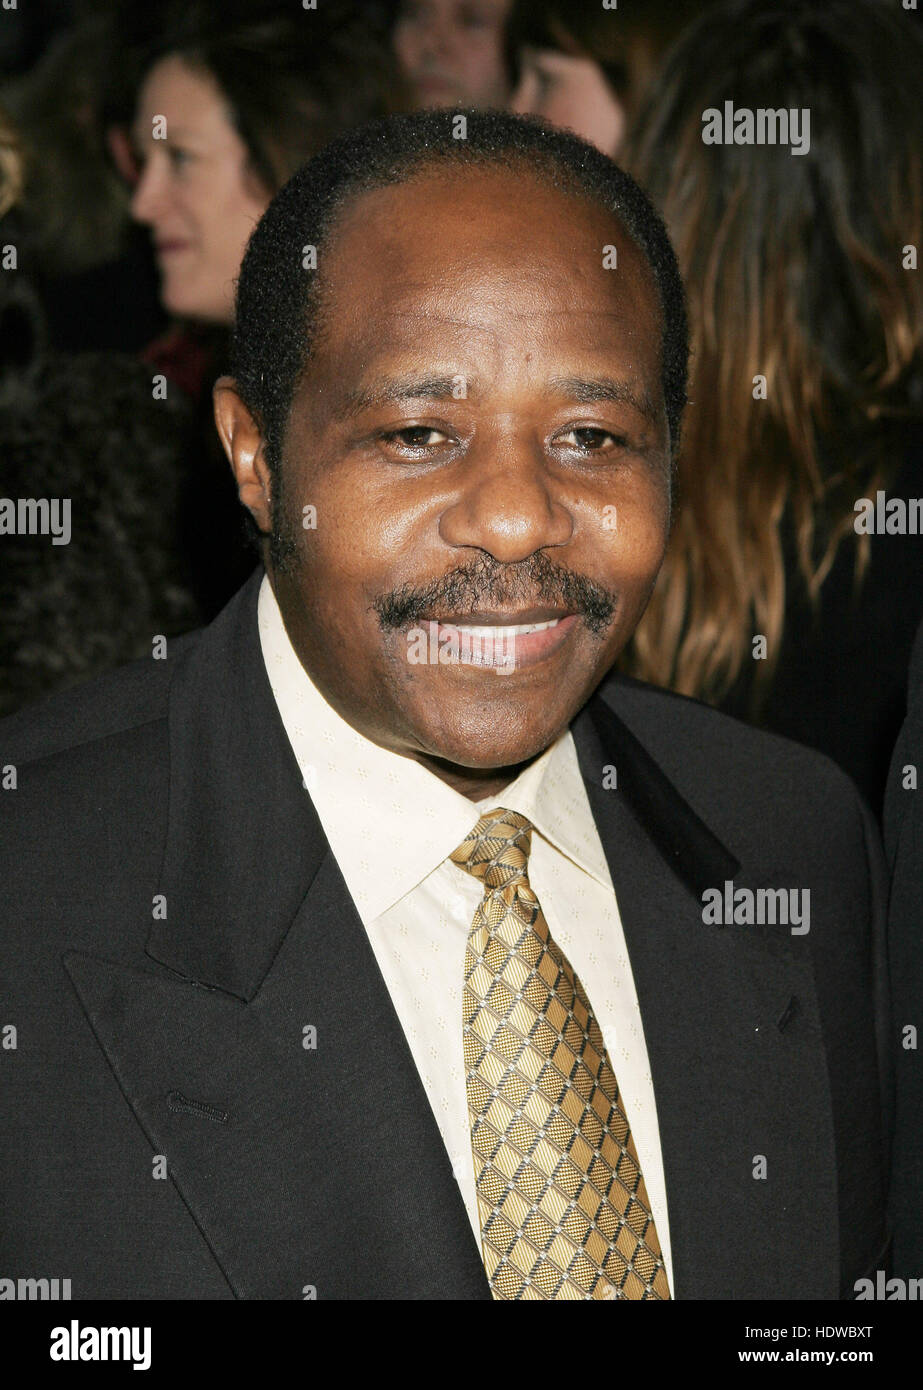 Paul Rusesabagina, the inspiration for the film, Hotel Rwanda, arrives at the 10th Annnual Critic's Choice Awards in Los Angeles, California on Sunday January 10, 2005. Photo credit: Francis Specker Stock Photo